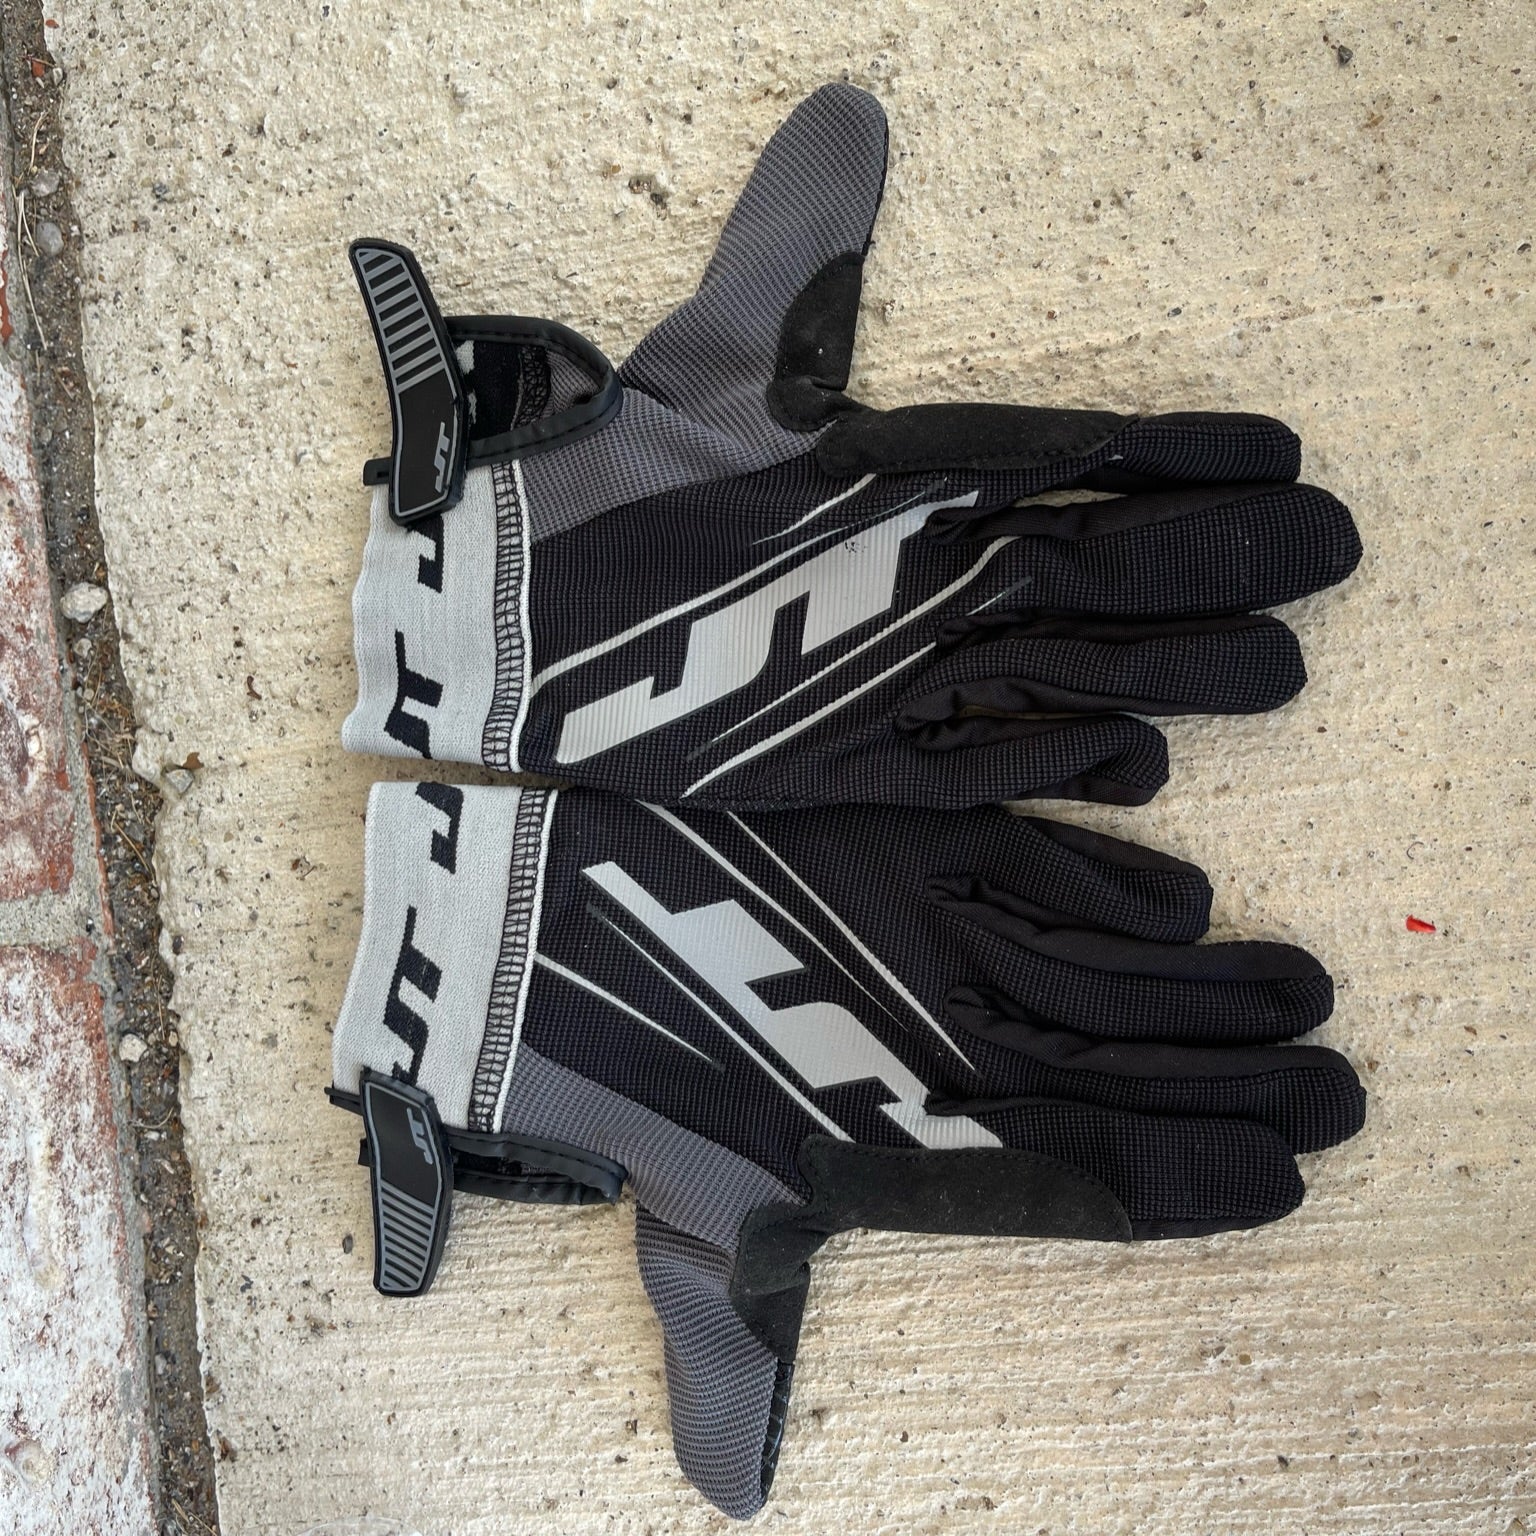 Used JT Tournament Paintball Glove - Black/Grey - Small